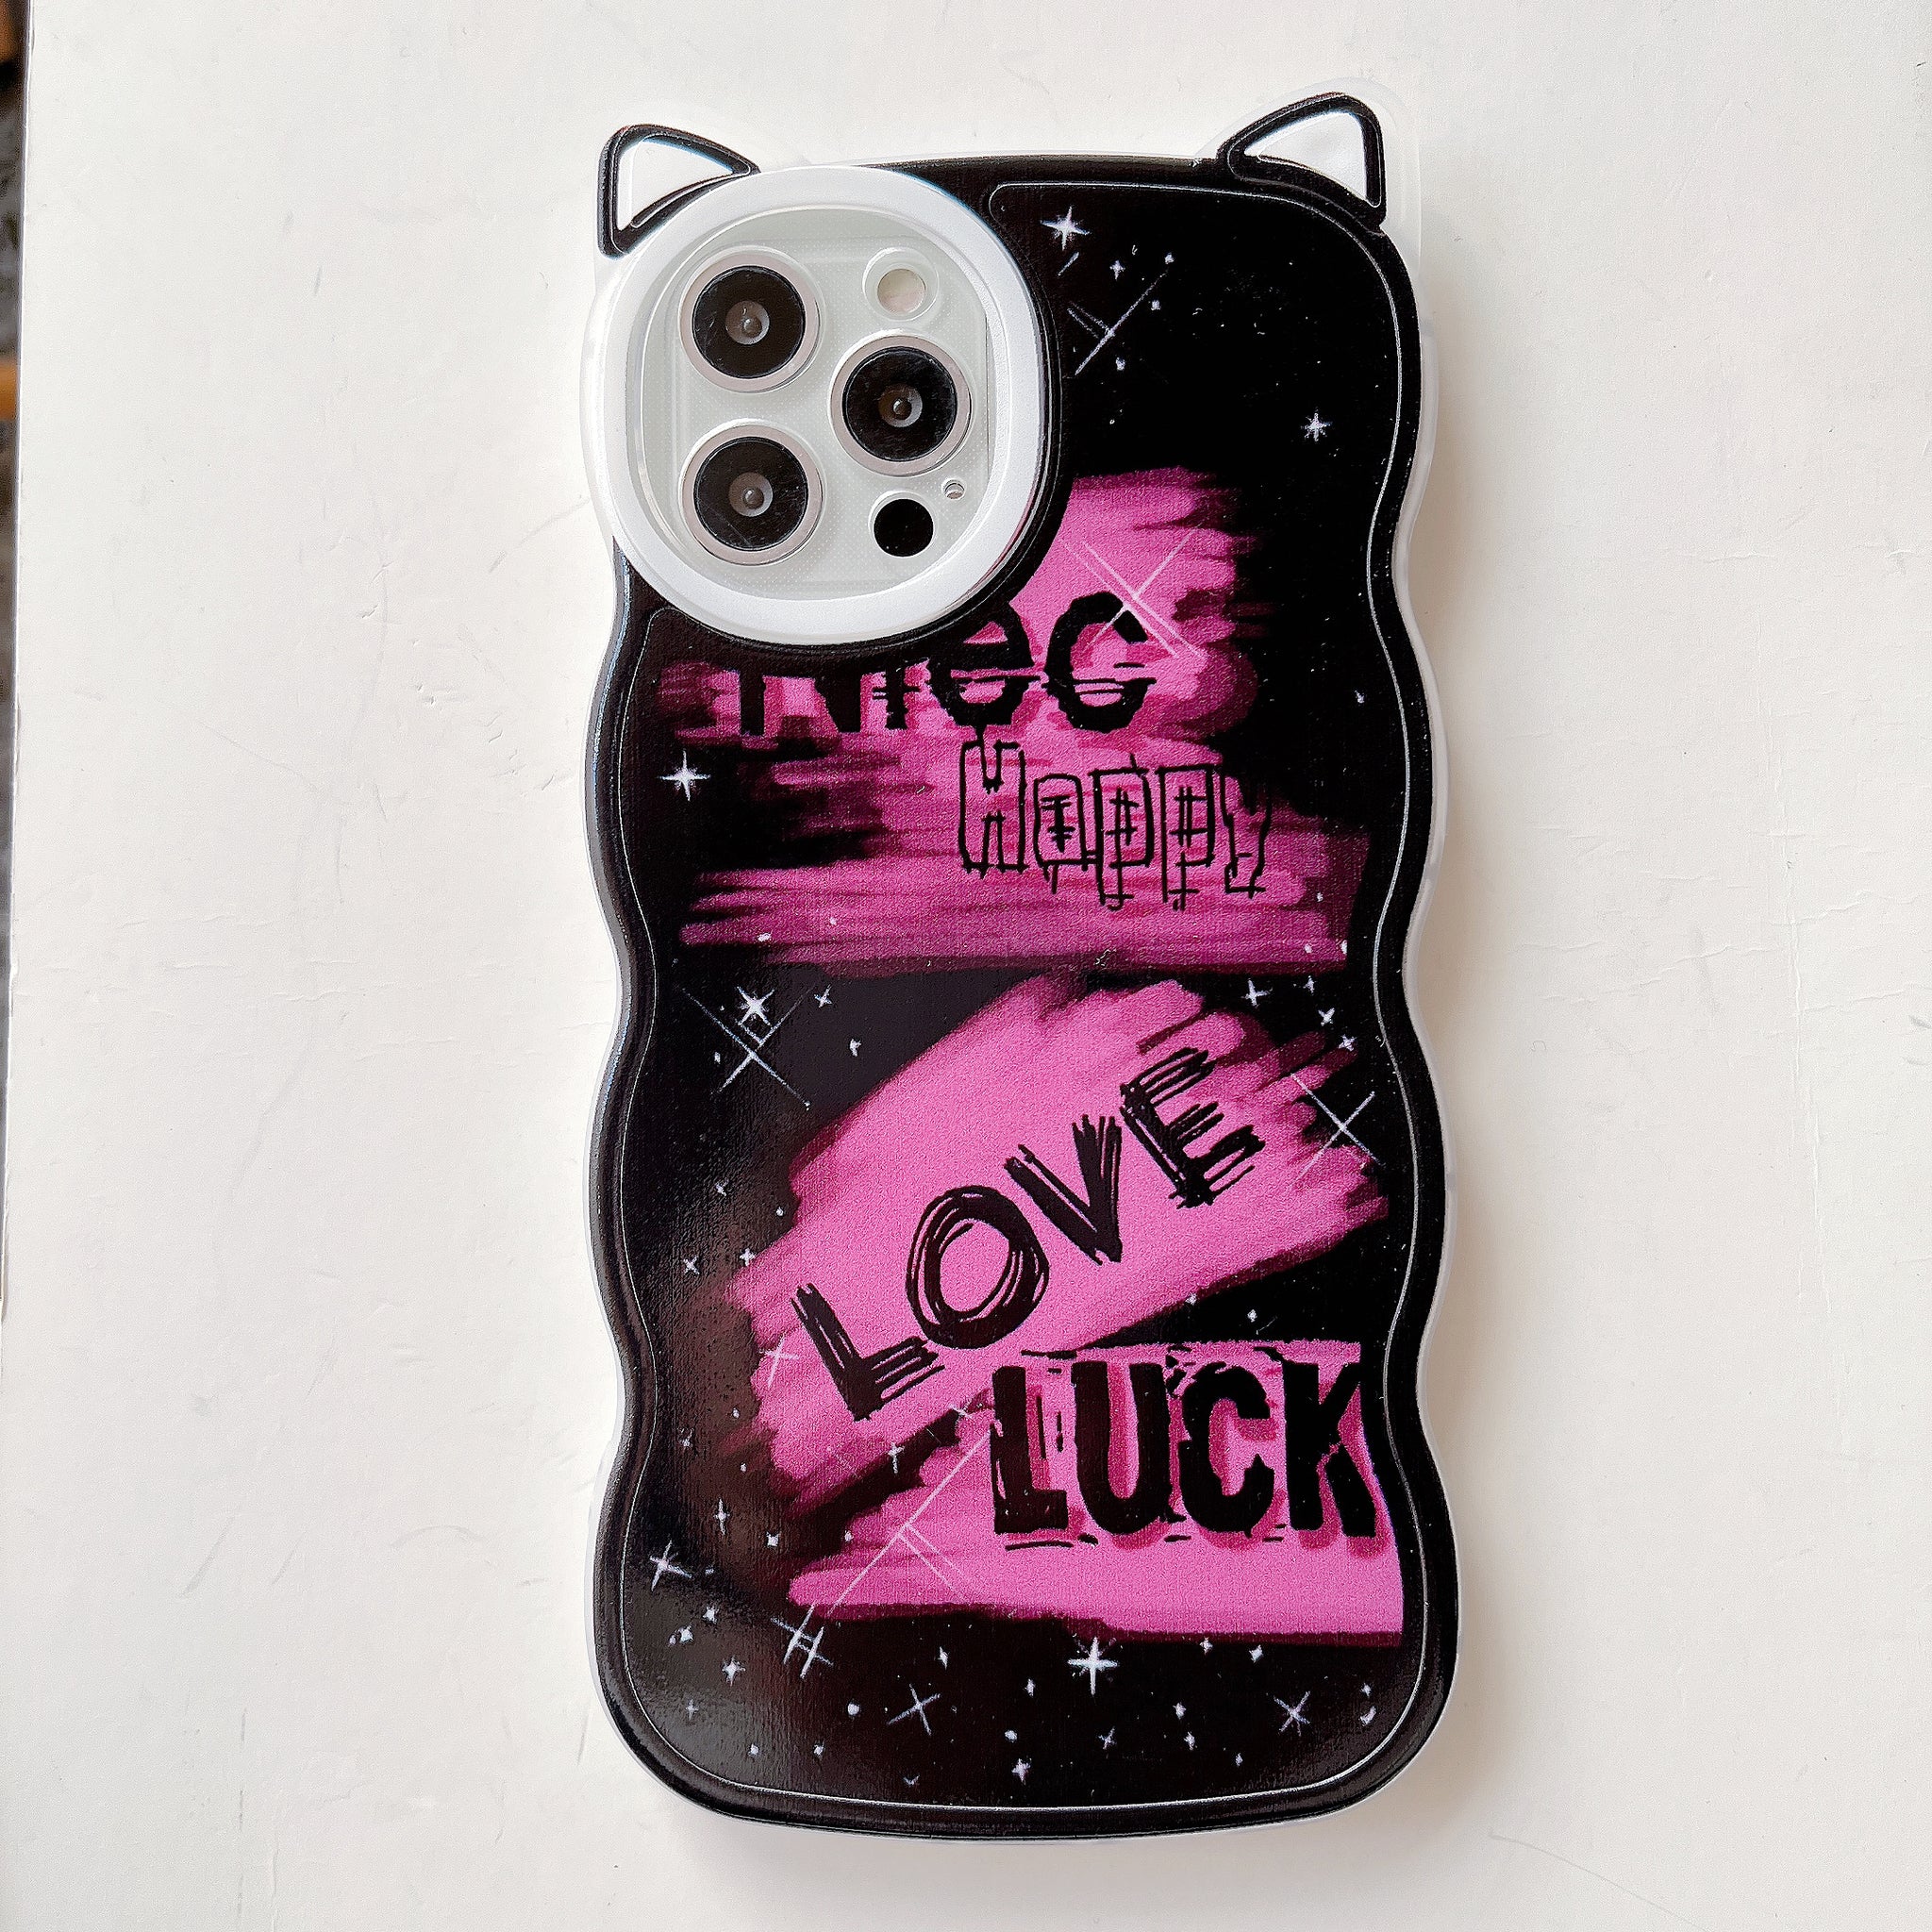 Cute Pinky Kitty Ear iPhone Cases for Series 14 13 12 11 X Xs Pro Max